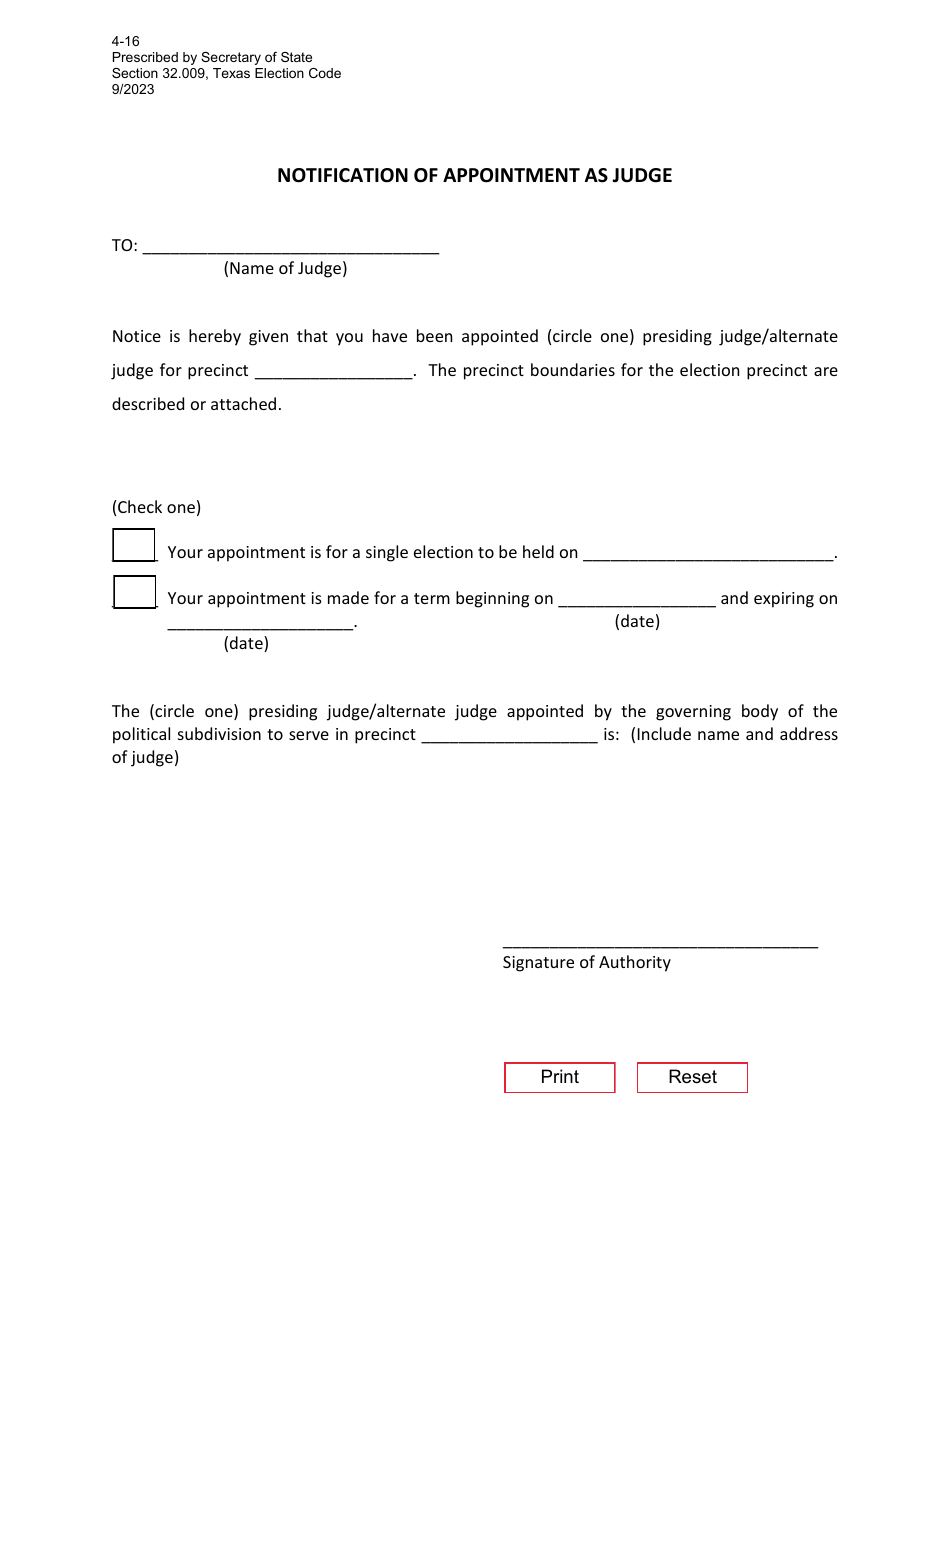 Form 4-16 Notification of Appointment as Judge - Texas, Page 1